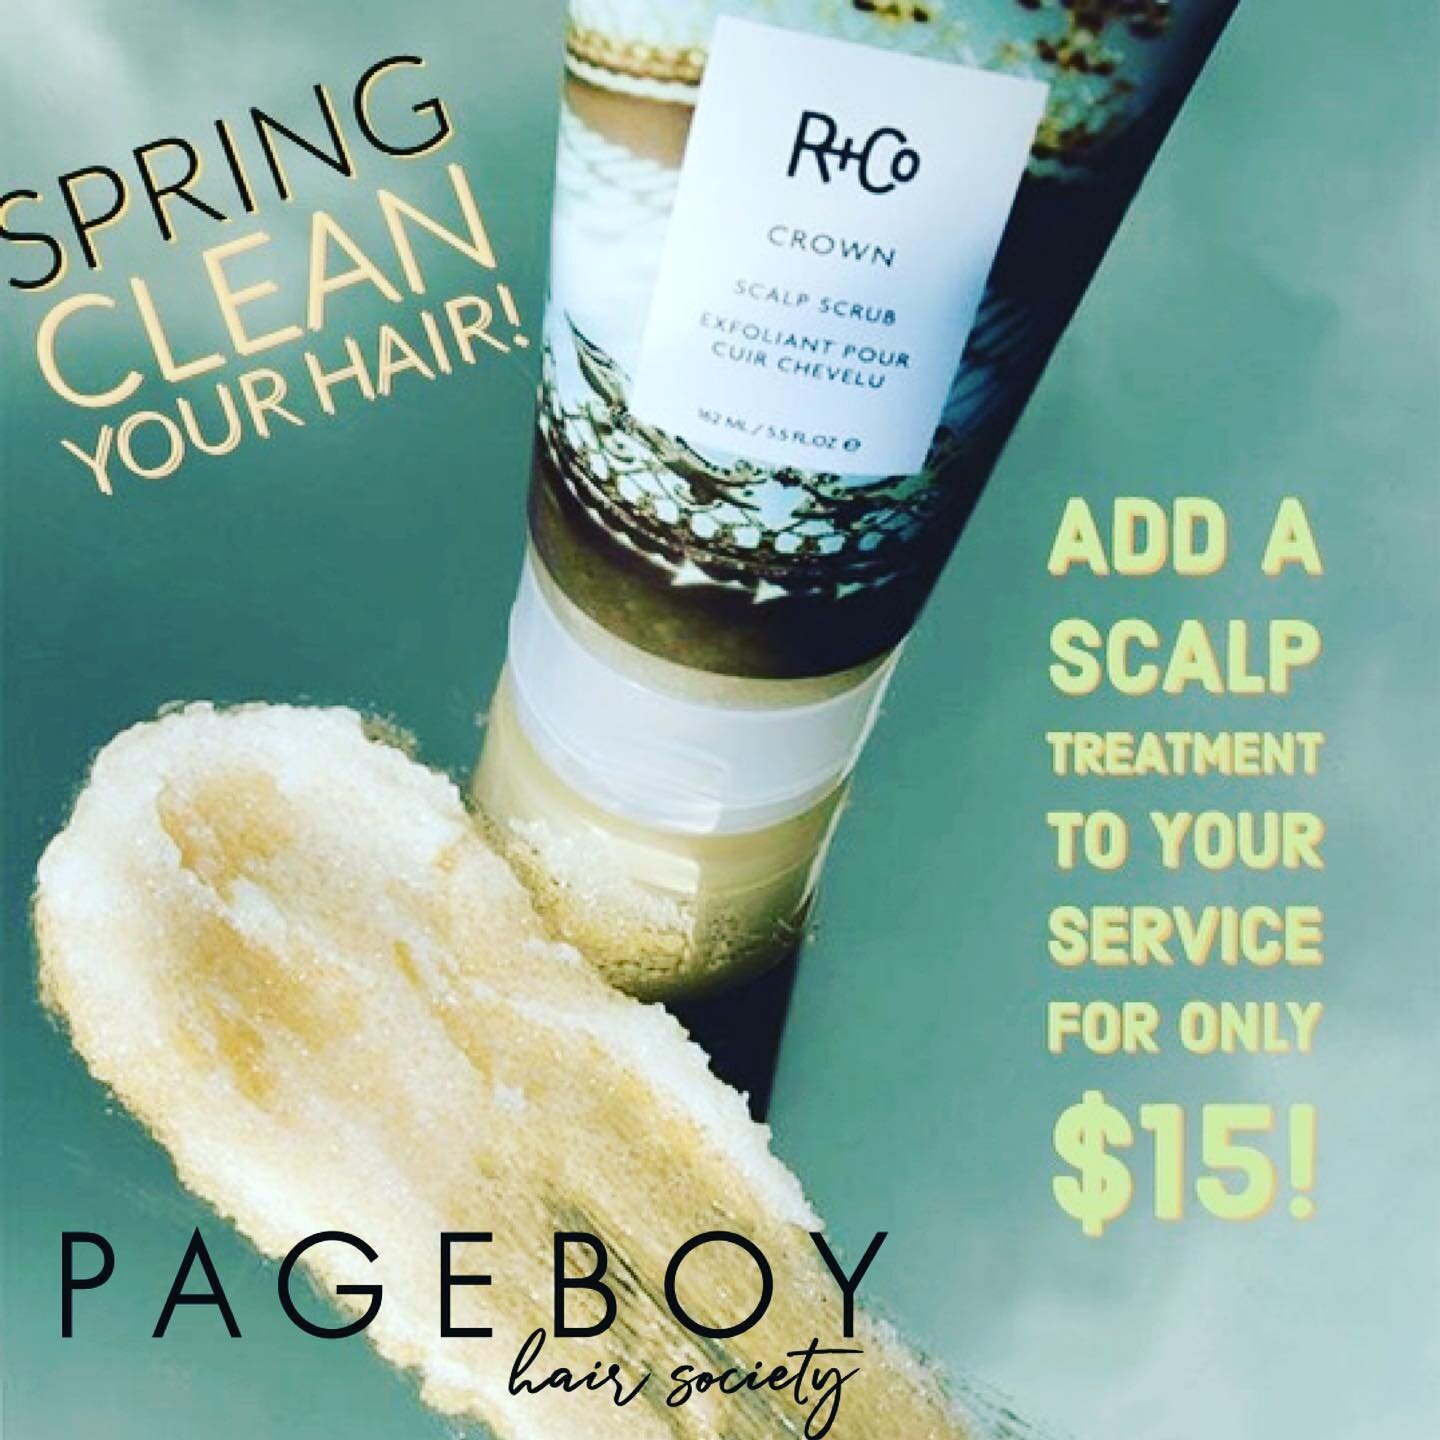 Did you know that a scrub can help your hair grow? 

Keeping your follicle clean and free of debris can help hair grow quicker! 

Add any of our scalp scrubs to your color or haircut reservation for only $15 all of March and April!